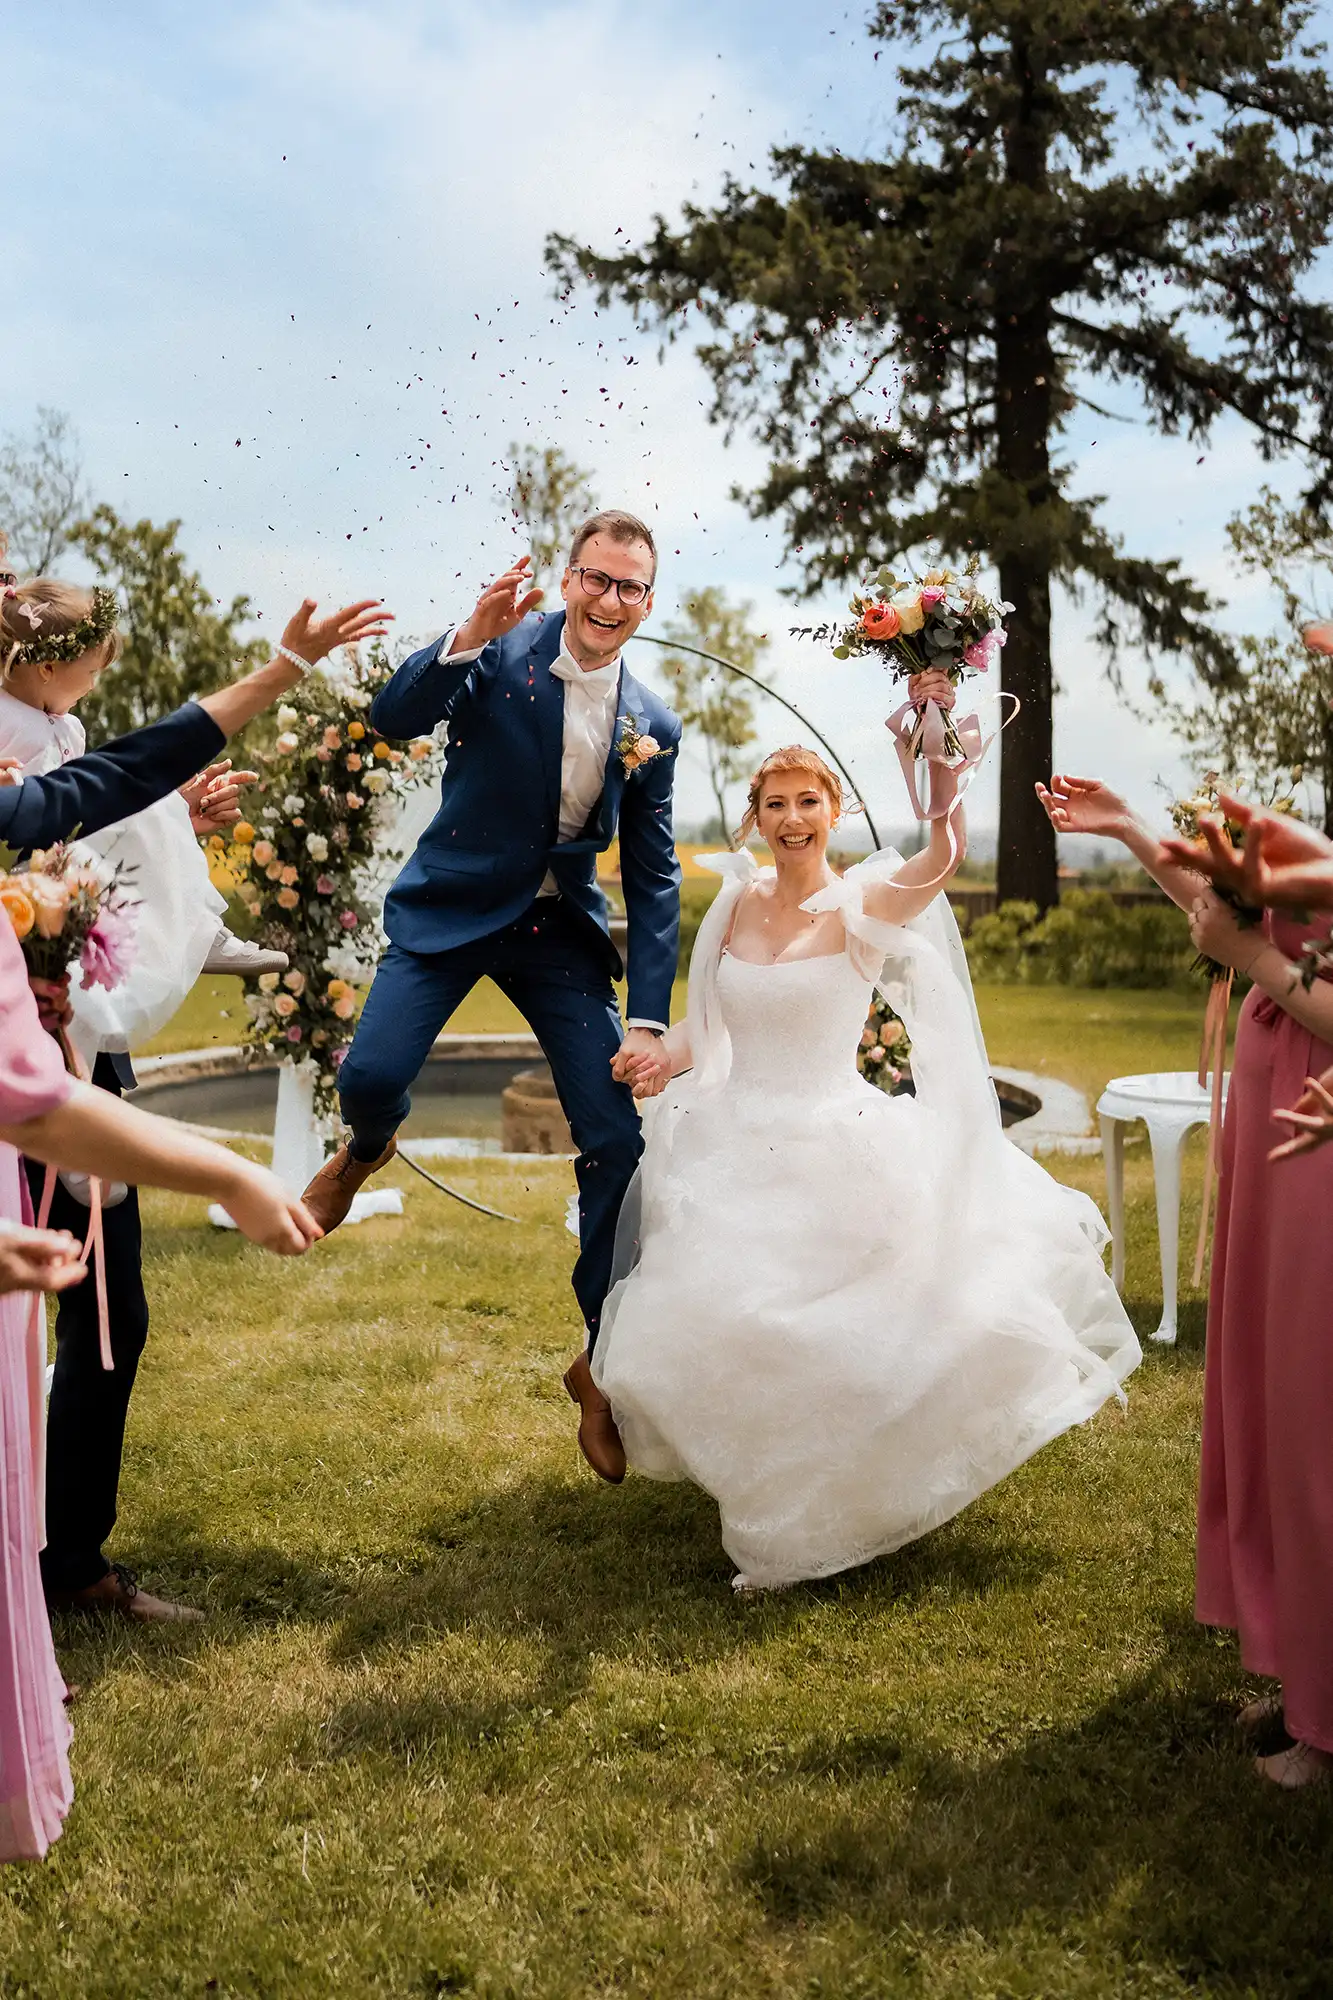 wedding photos of a jumping groom and bride in a firecracker